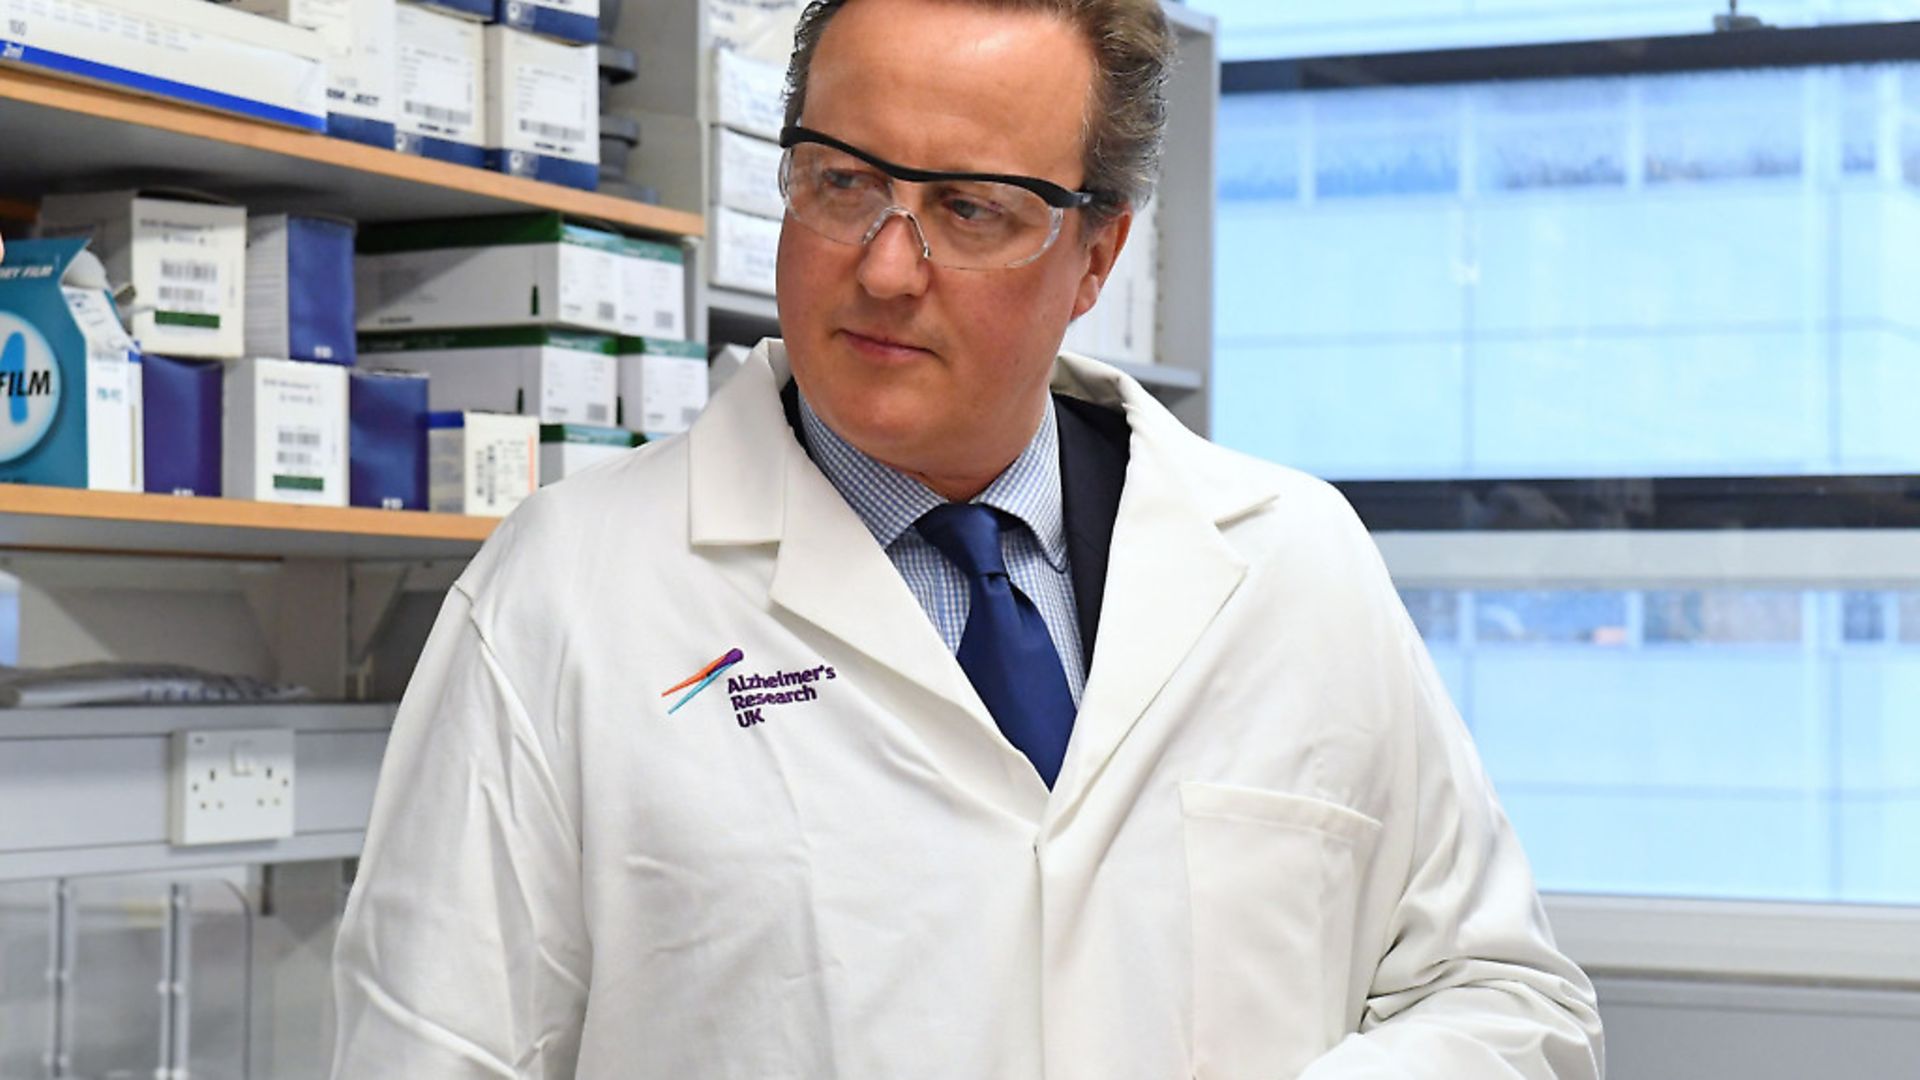 Former prime minister David Cameron. Photograph: Victoria Jones/PA. - Credit: PA Archive/PA Images